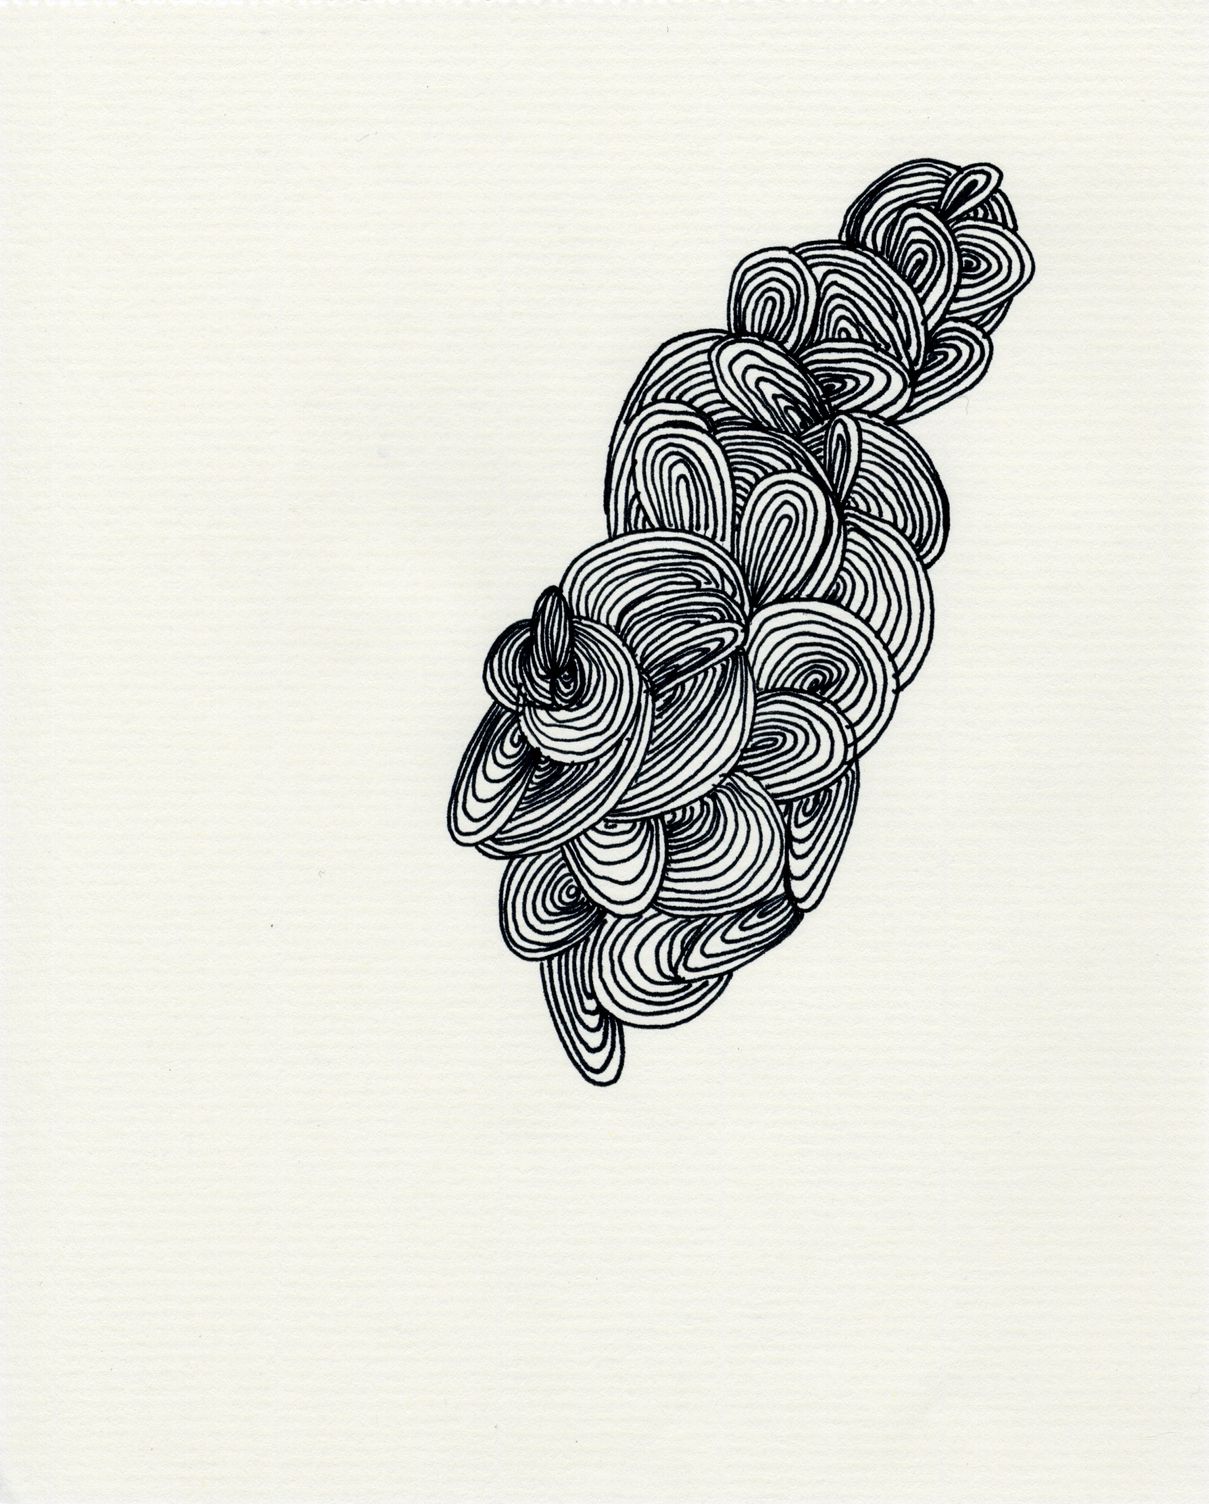 Waterfall Curls (2011), Work on Paper by Claudia Hill